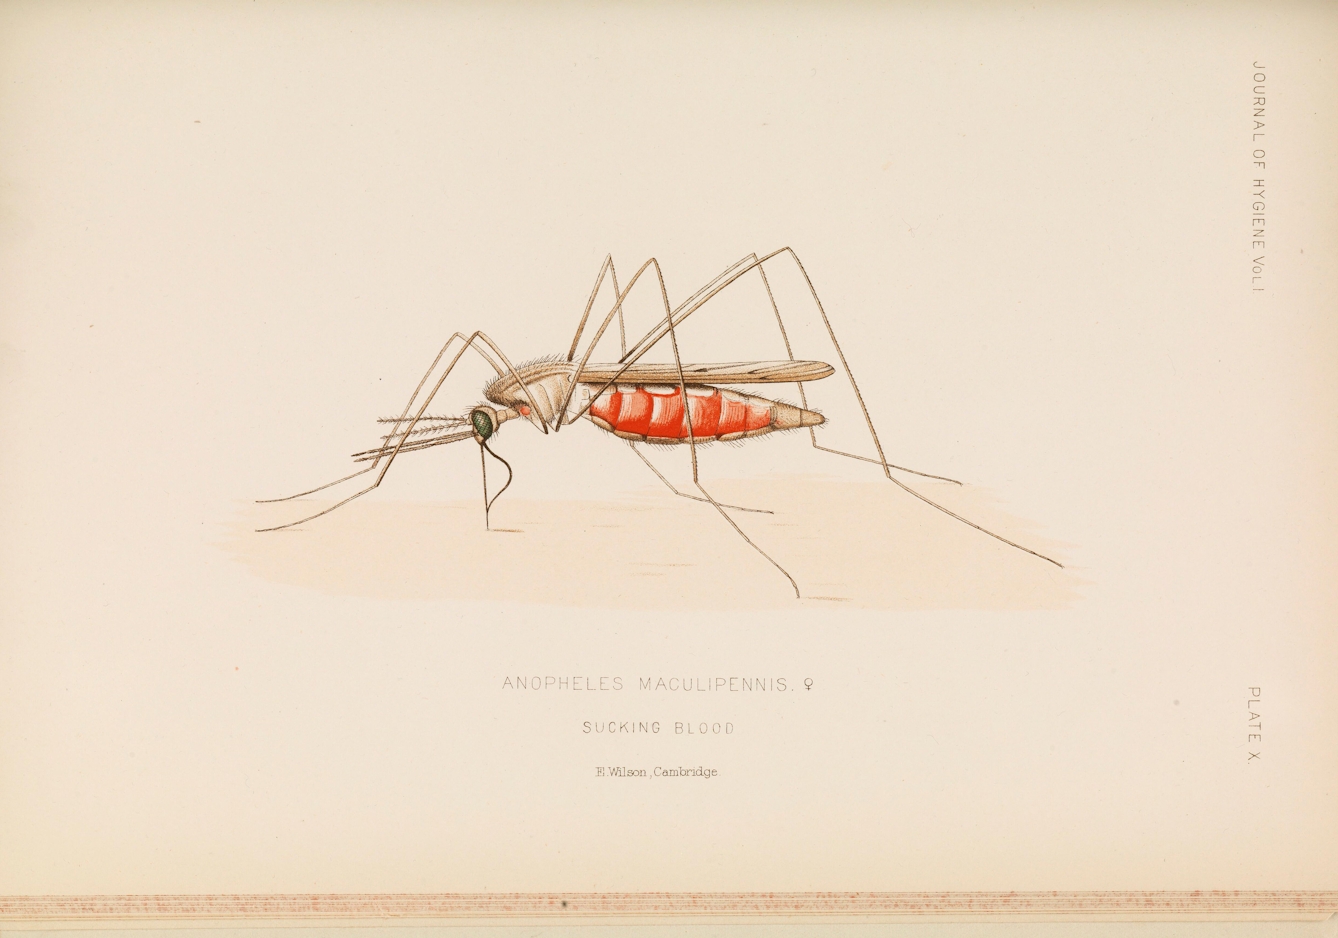 Scientific illustration of an Anopheles mosquiteo with its proboscis inserted in the skin drawing blood. It's bood is red, to show it's full of blood.